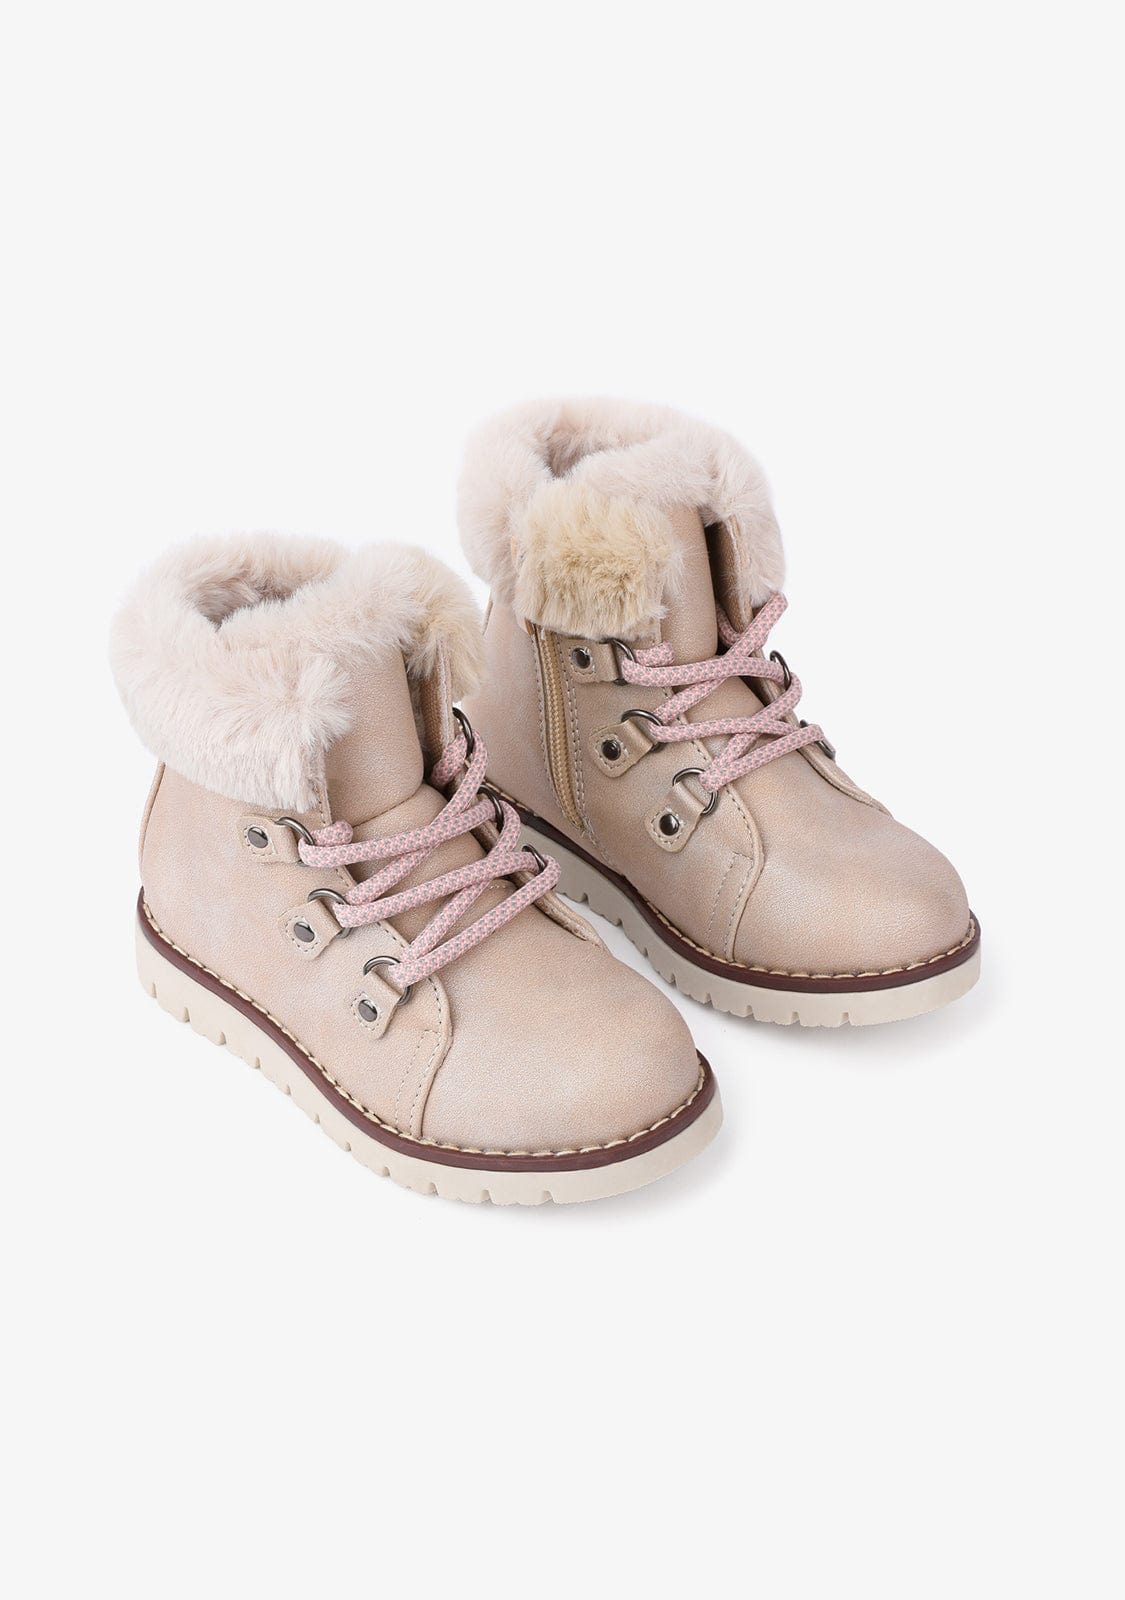 CONGUITOS Shoes Girl's Beige Ankle Boots Nobuck